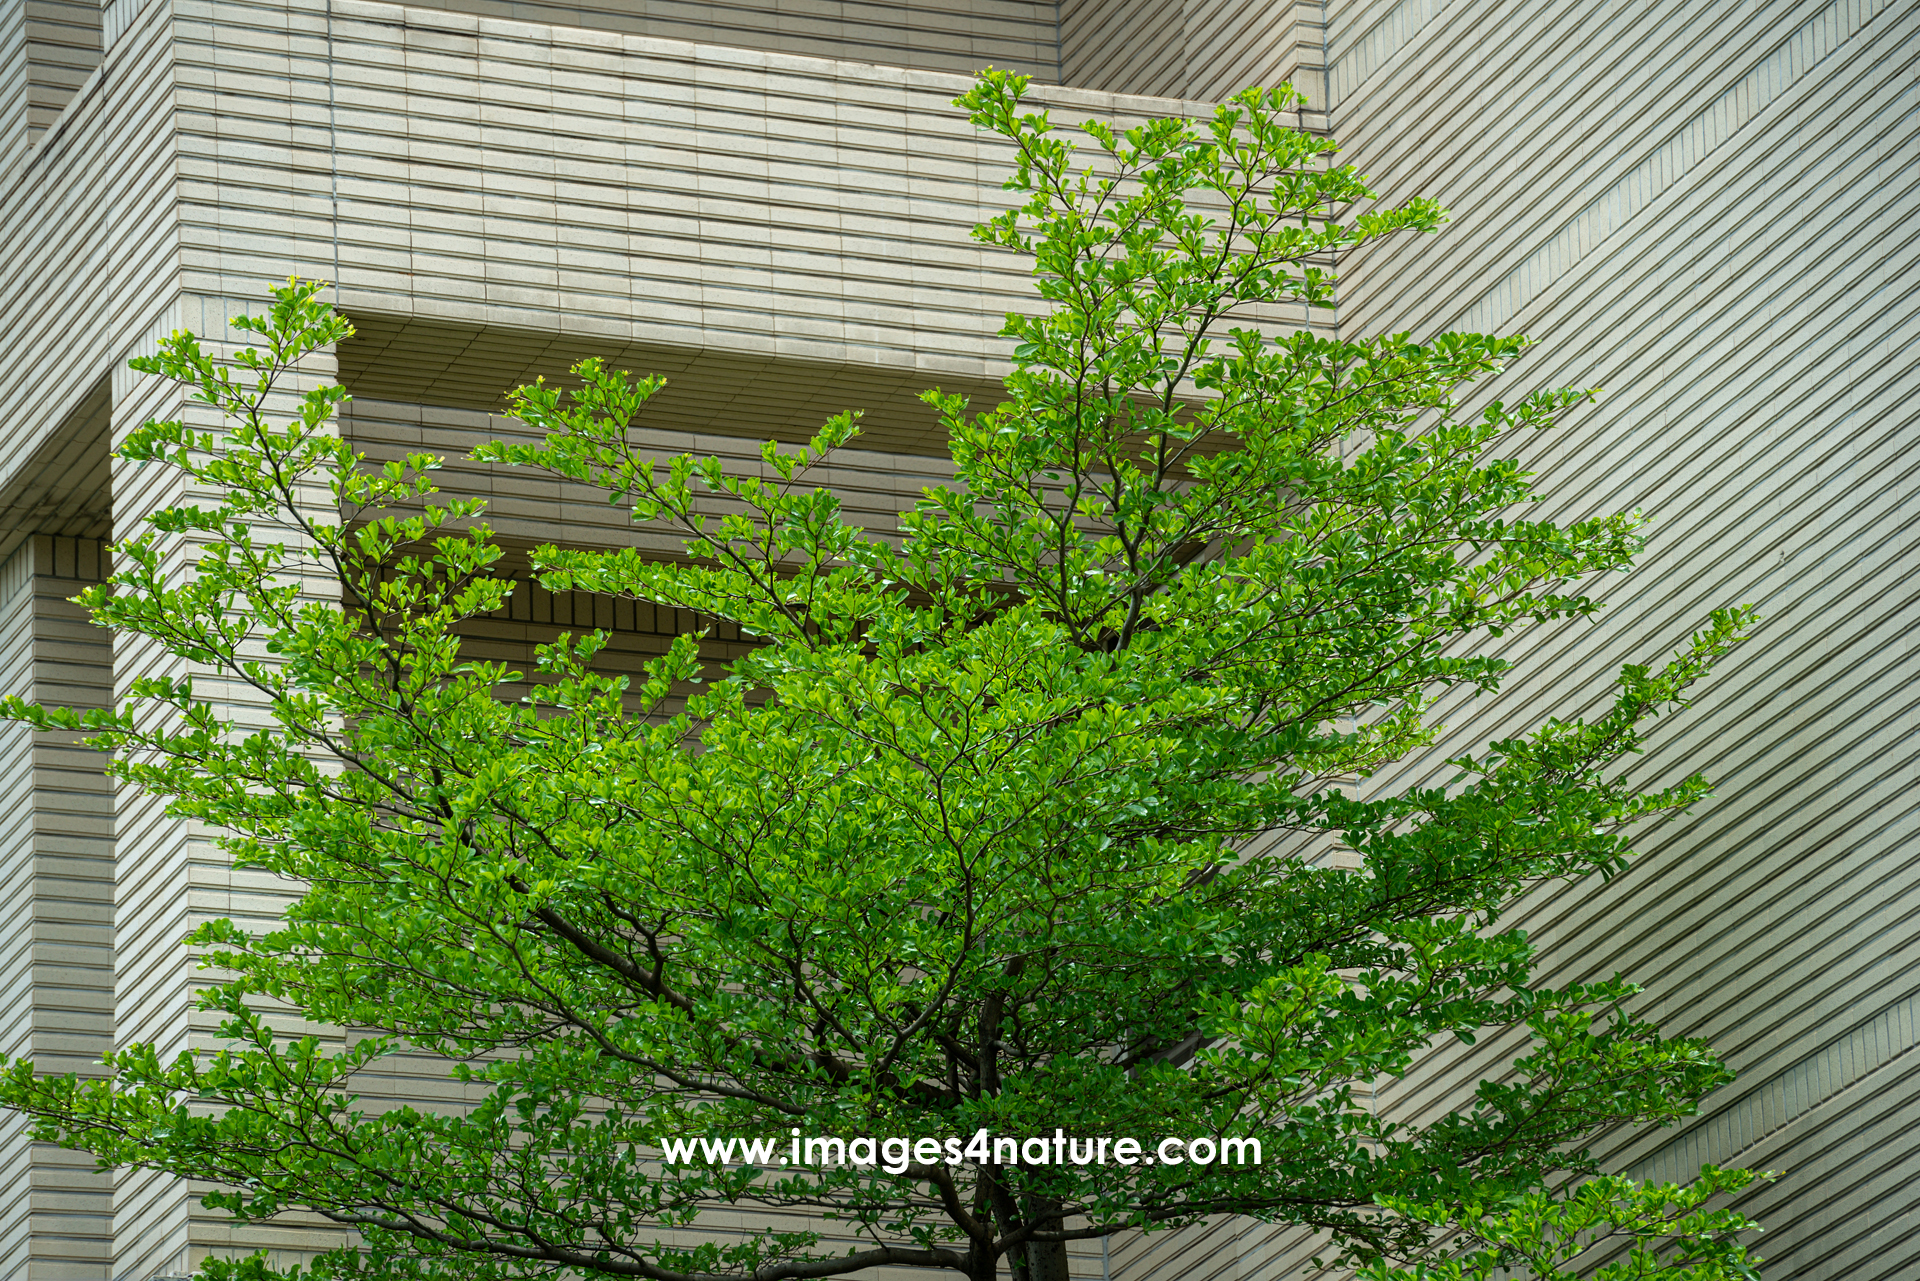 Low-angle view of a tree with fresh green leaves against the backdrop of a white building